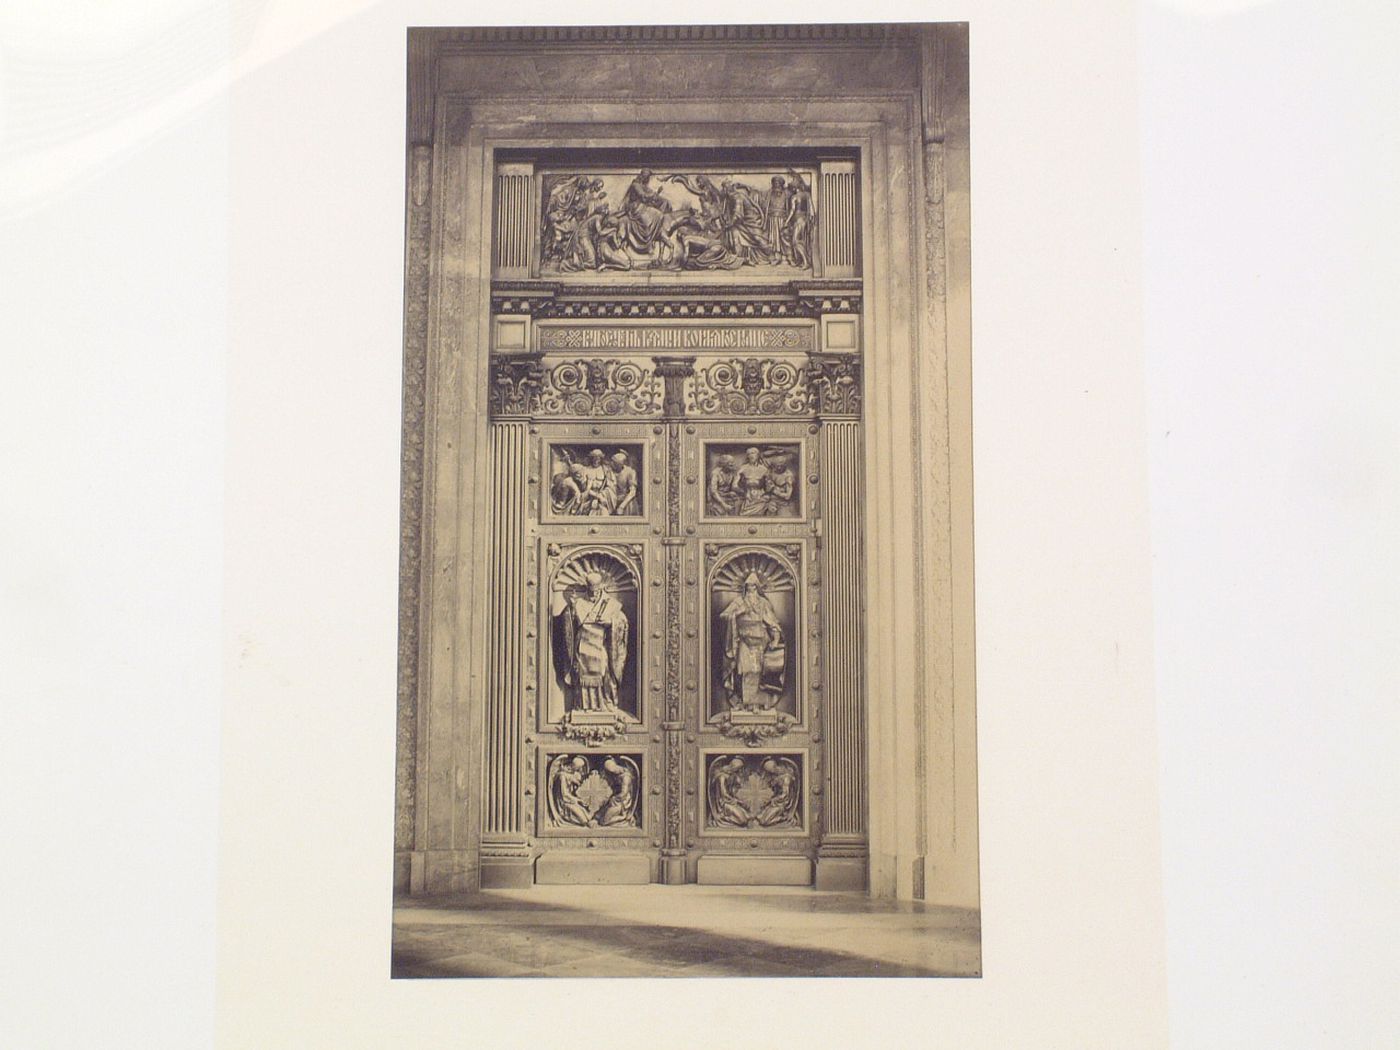 Exterior view of the main bronze entrance doors with bas-reliefs, Saint Isaac's Cathedral, Saint Petersburg, Russia